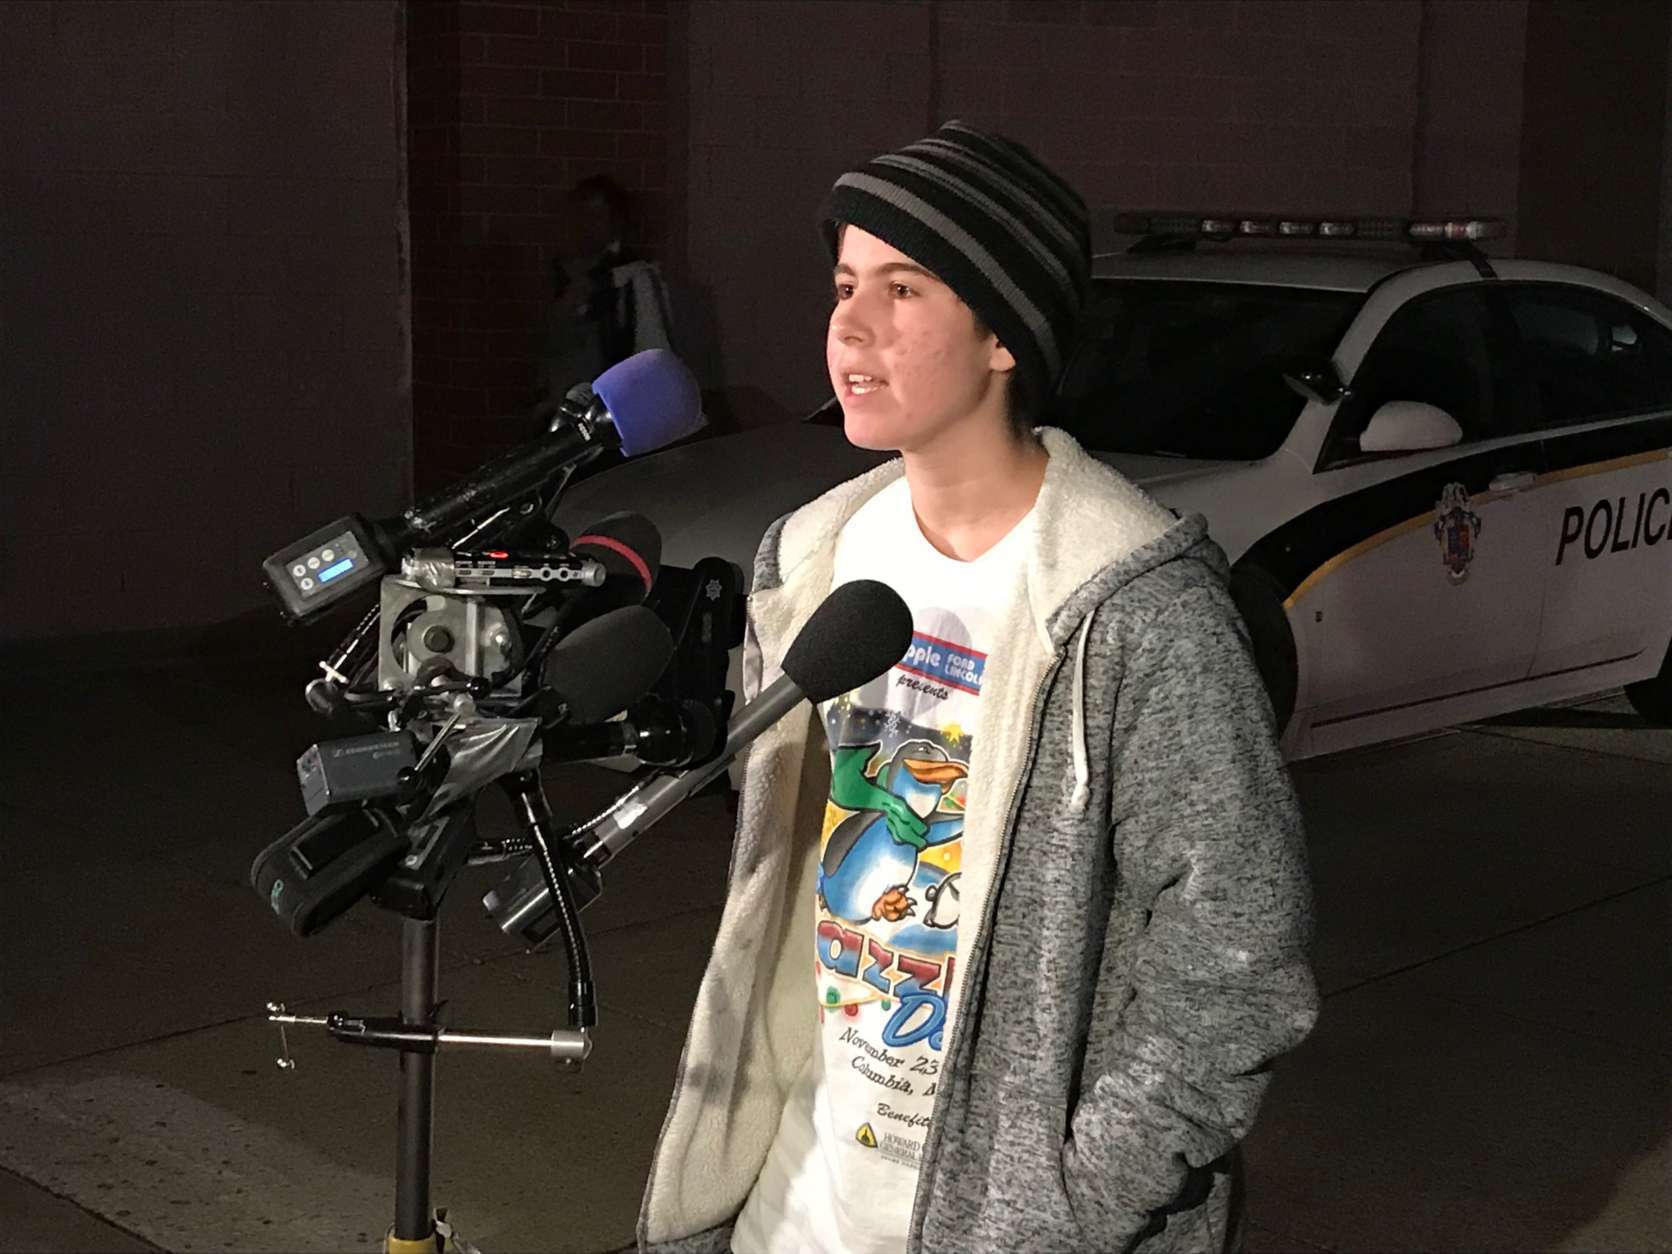 Charlie Summers, a 9th grader at Einstein High School., speaks in front of the media Monday night. (WTOP/Michelle Basch)